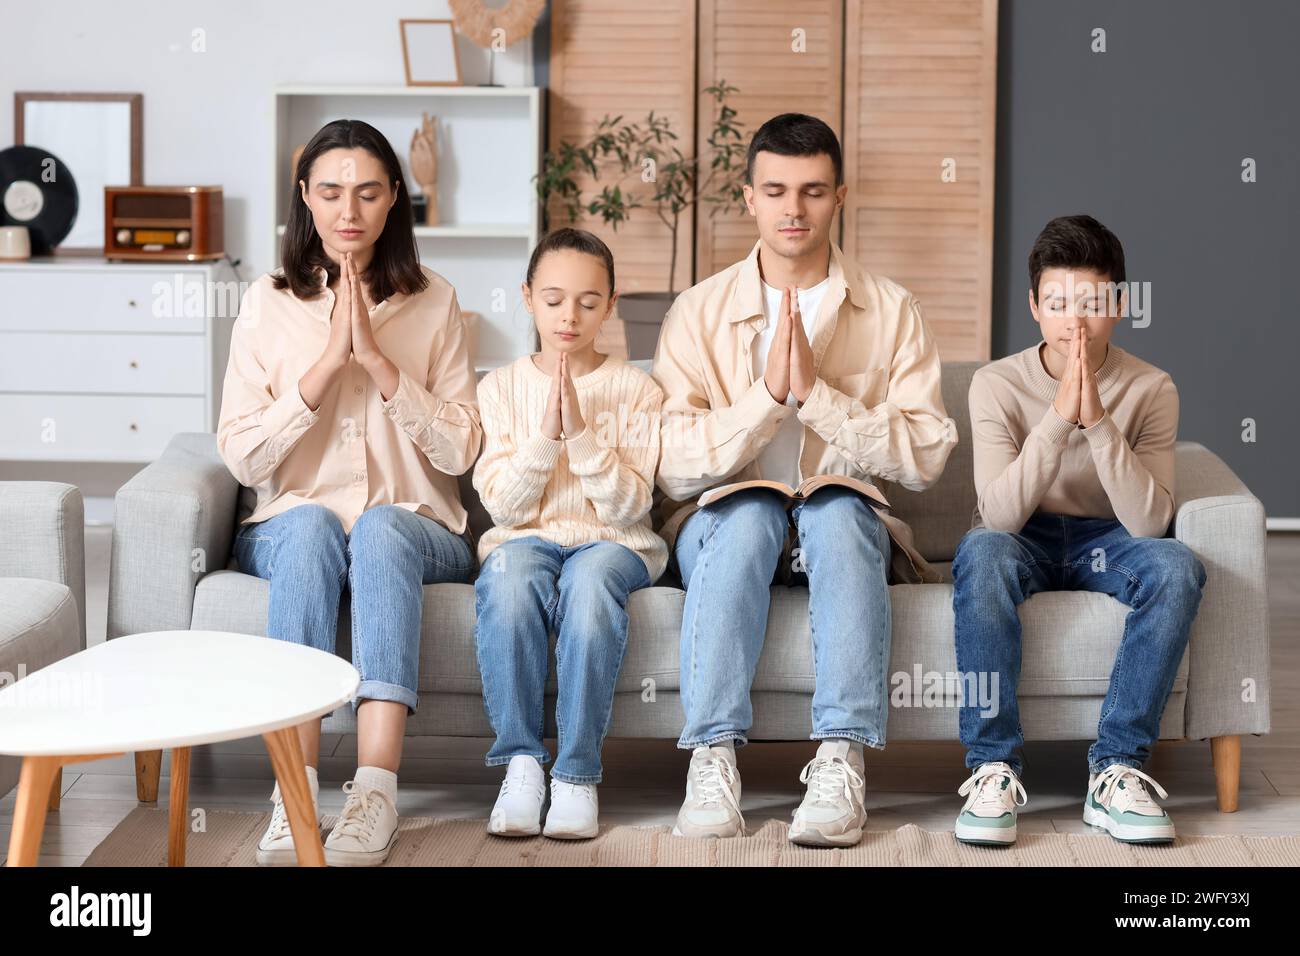 Family with Holy Bible praying on sofa at home Stock Photo